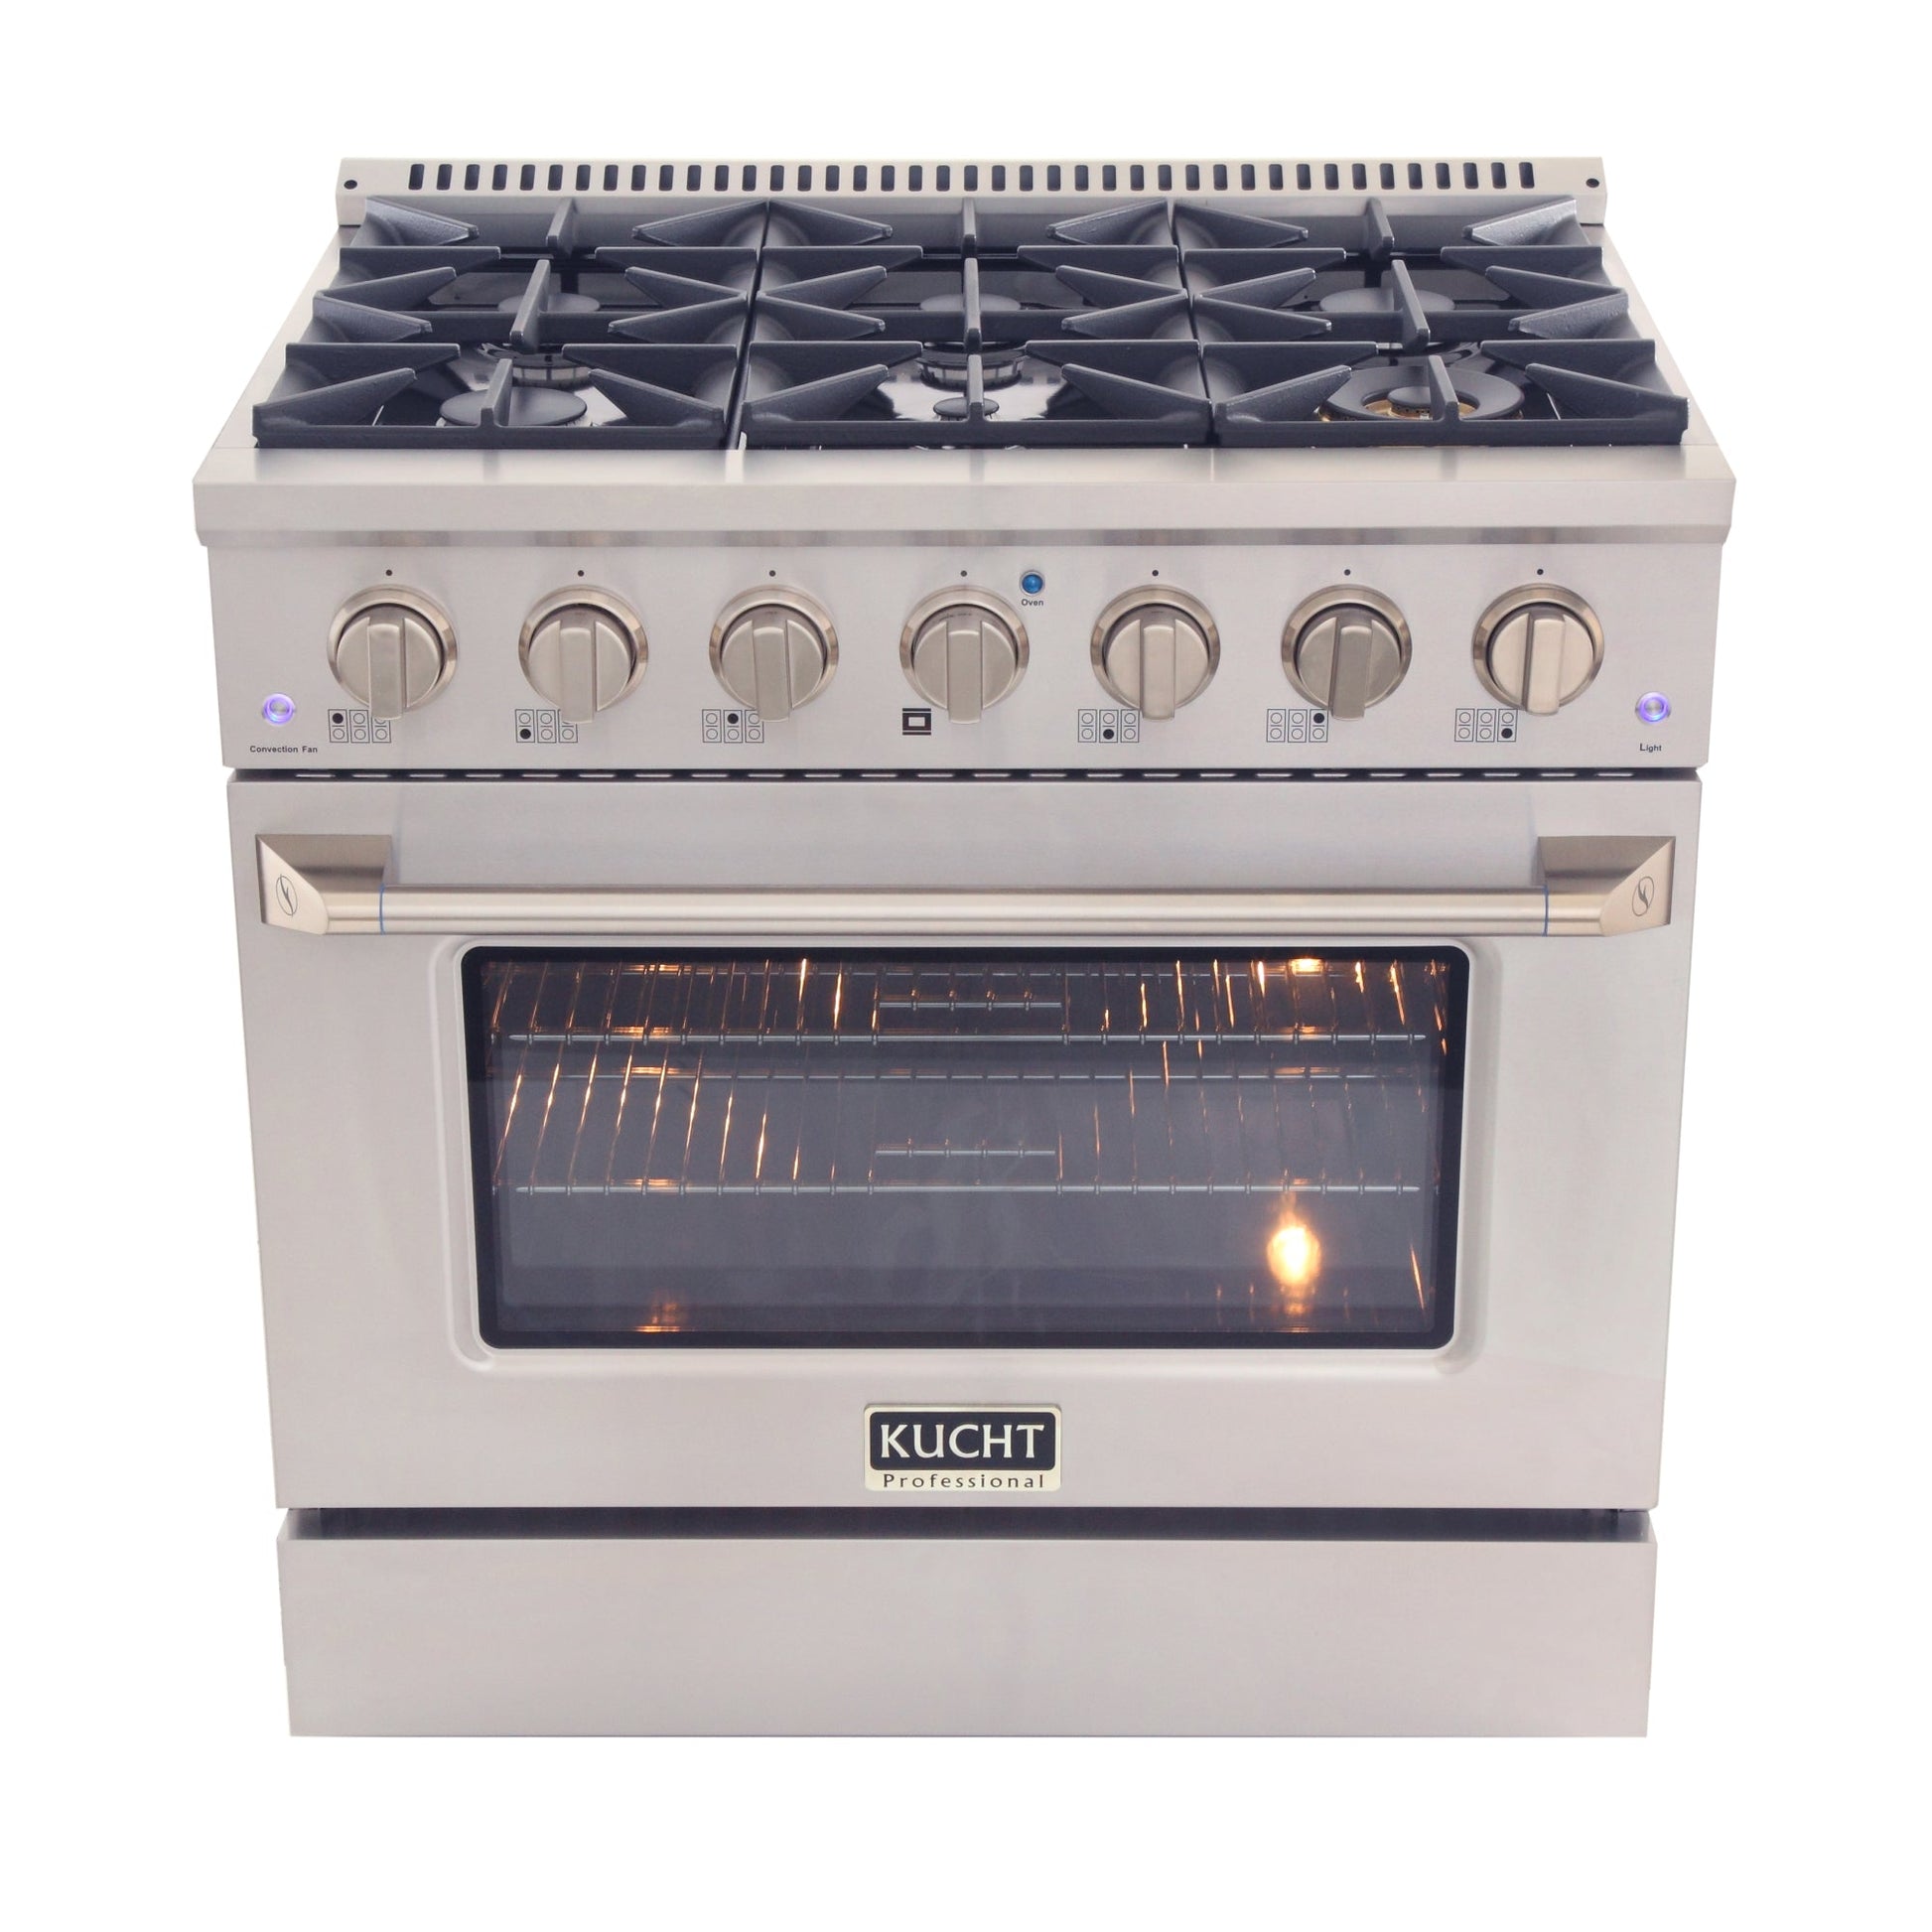 Kucht KNG Series 36" Stainless Steel Freestanding Propane Gas Range With 6 Burners